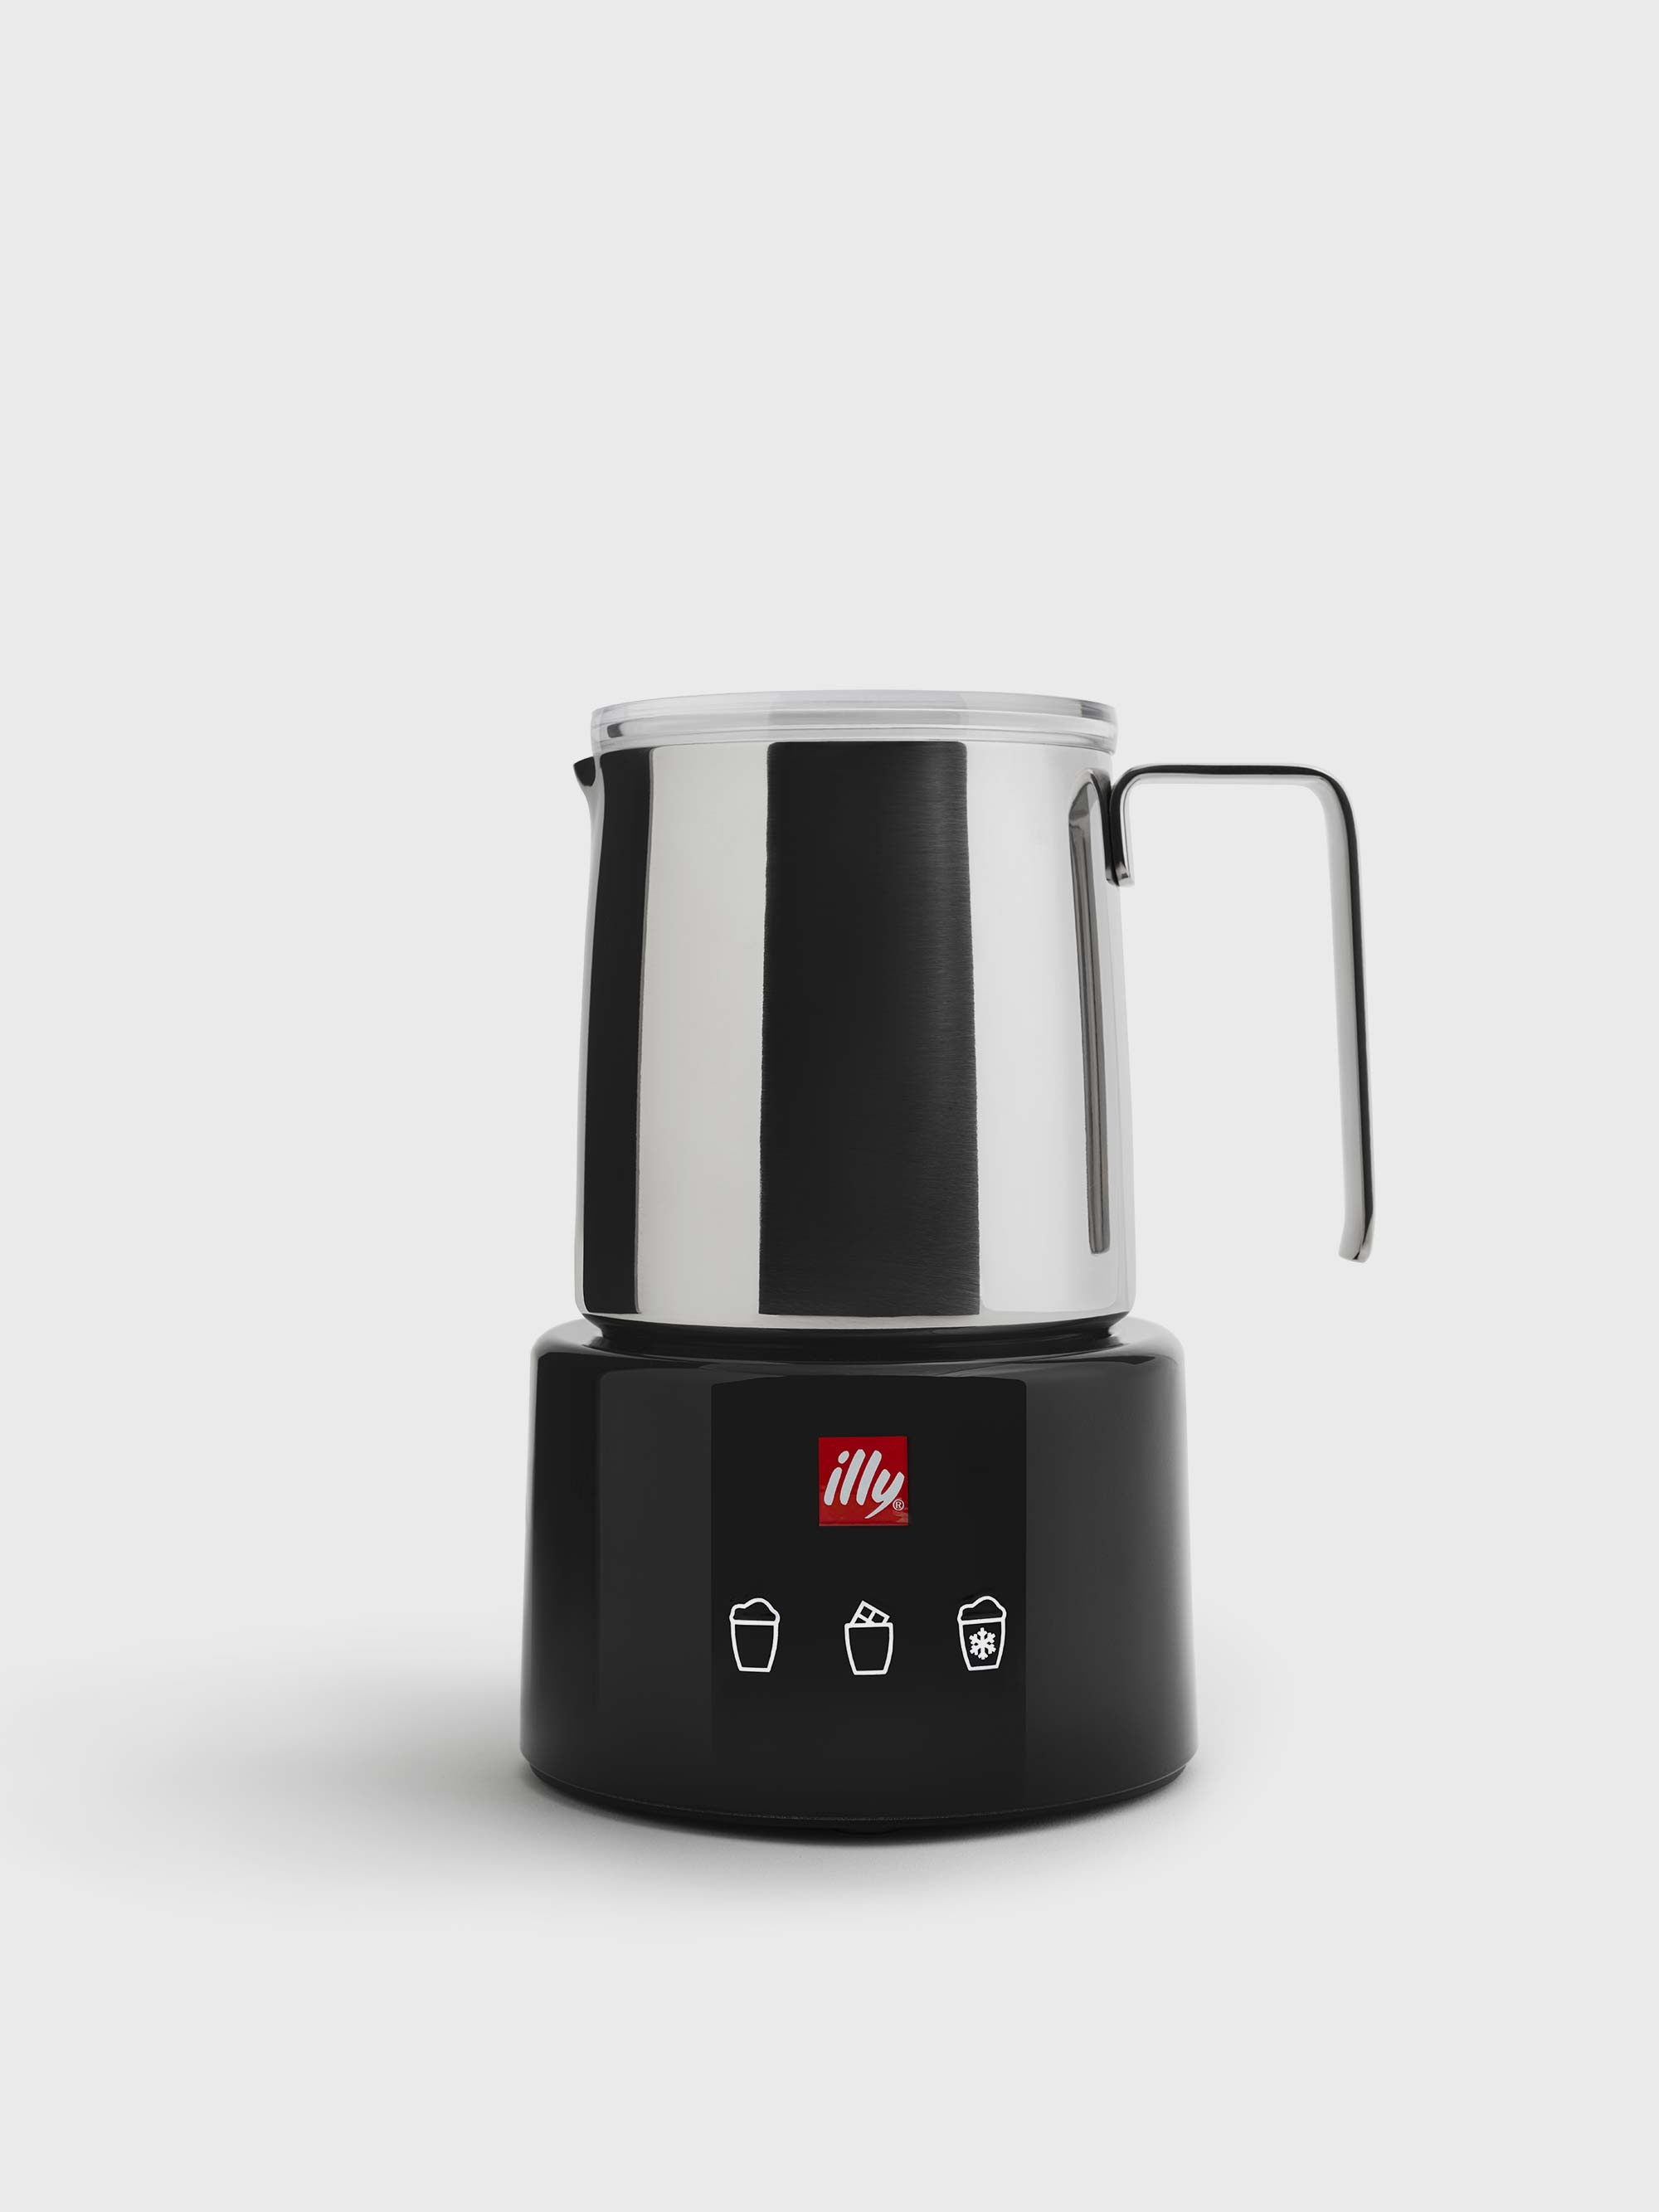 Milk frother illy by Piero Lissoni,black – I love coffee